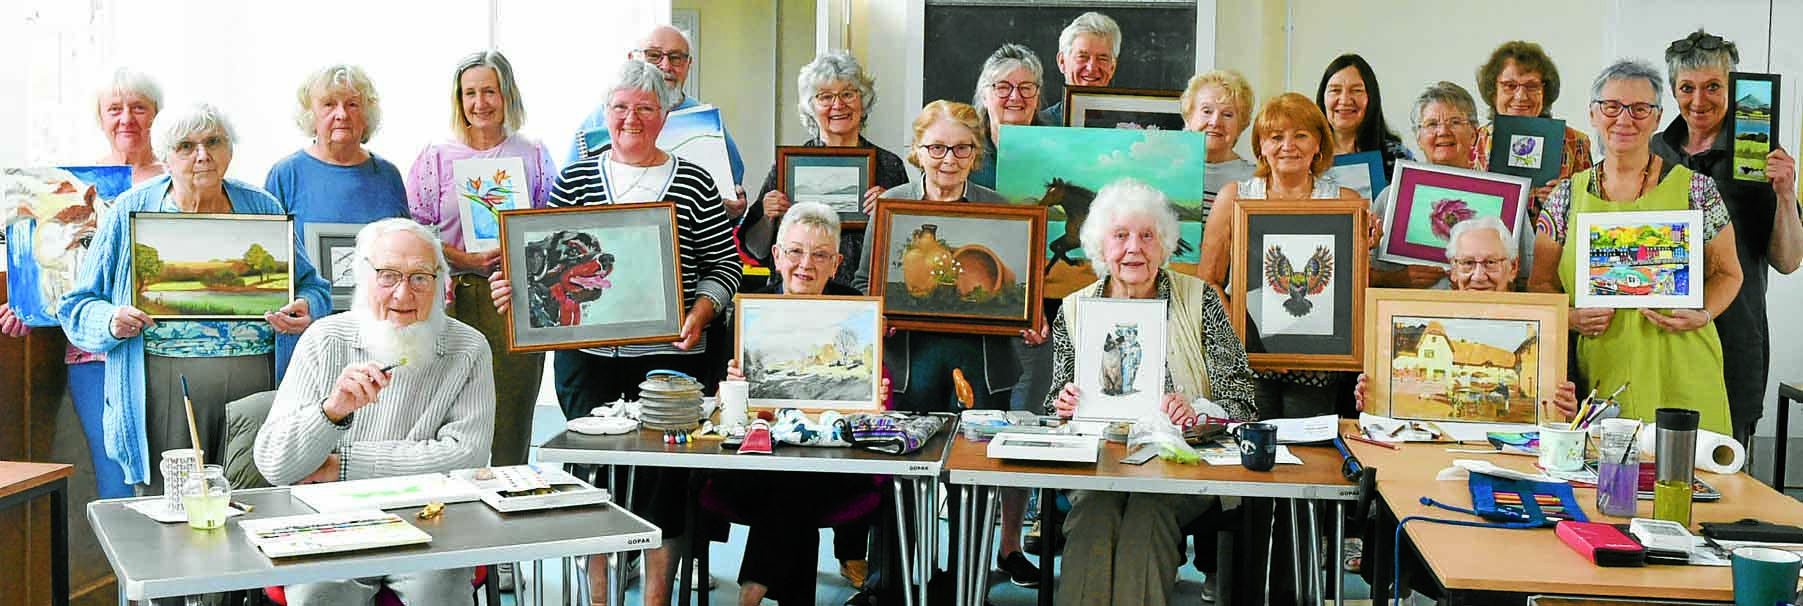 Debut show for local art group